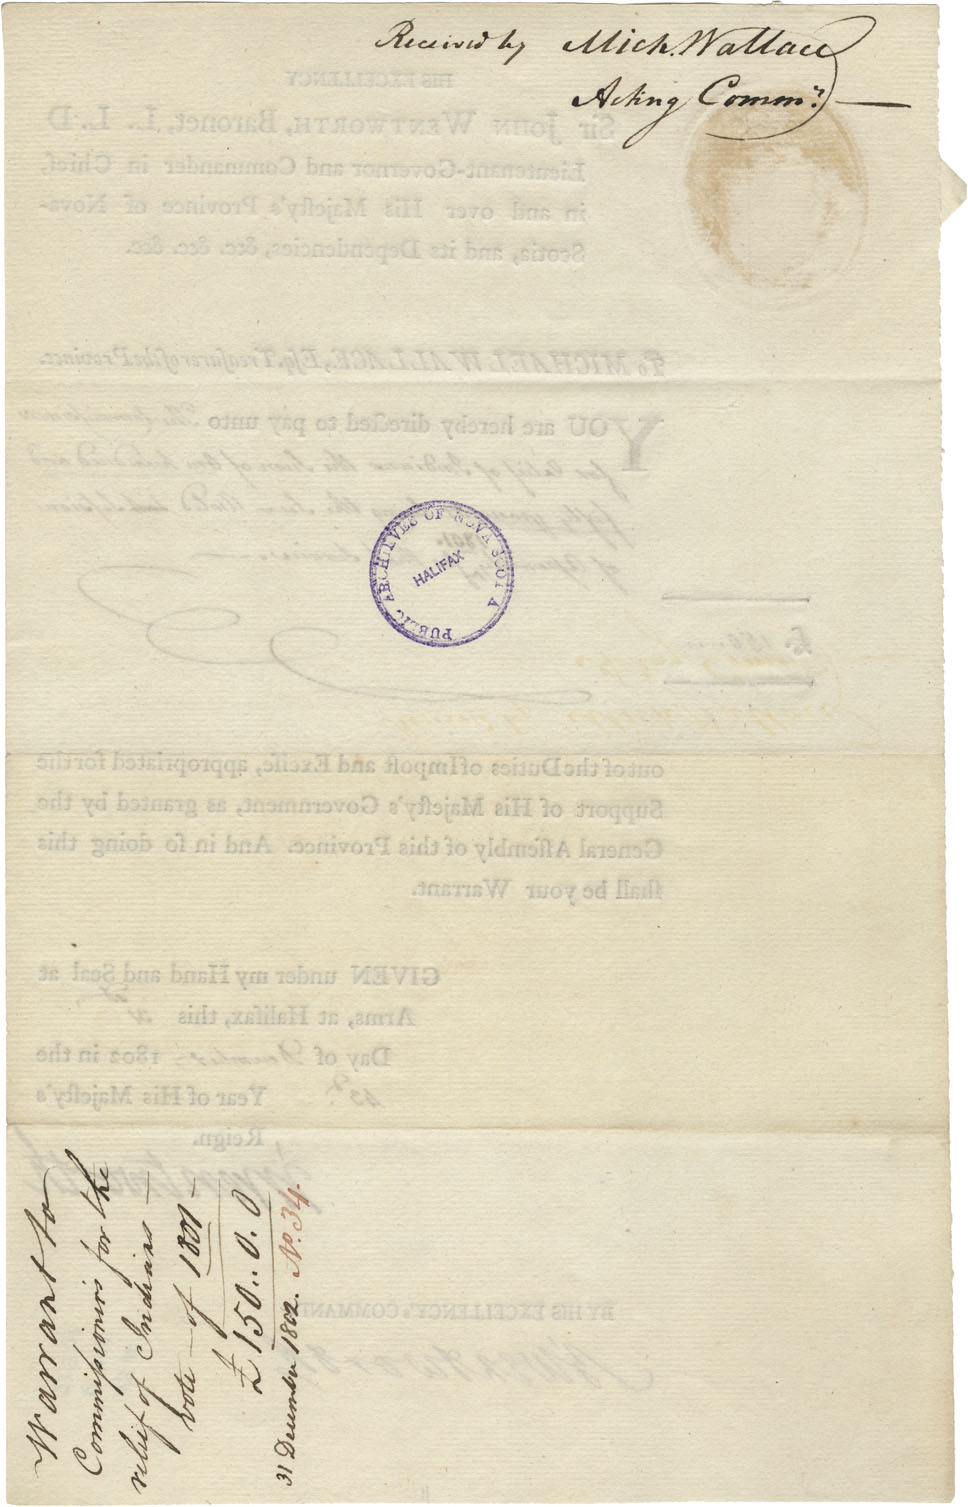 Sir John Wentworth's order to Michael Wallace to pay the Commissioners appointed for the relief of the Mi'kmaq. 